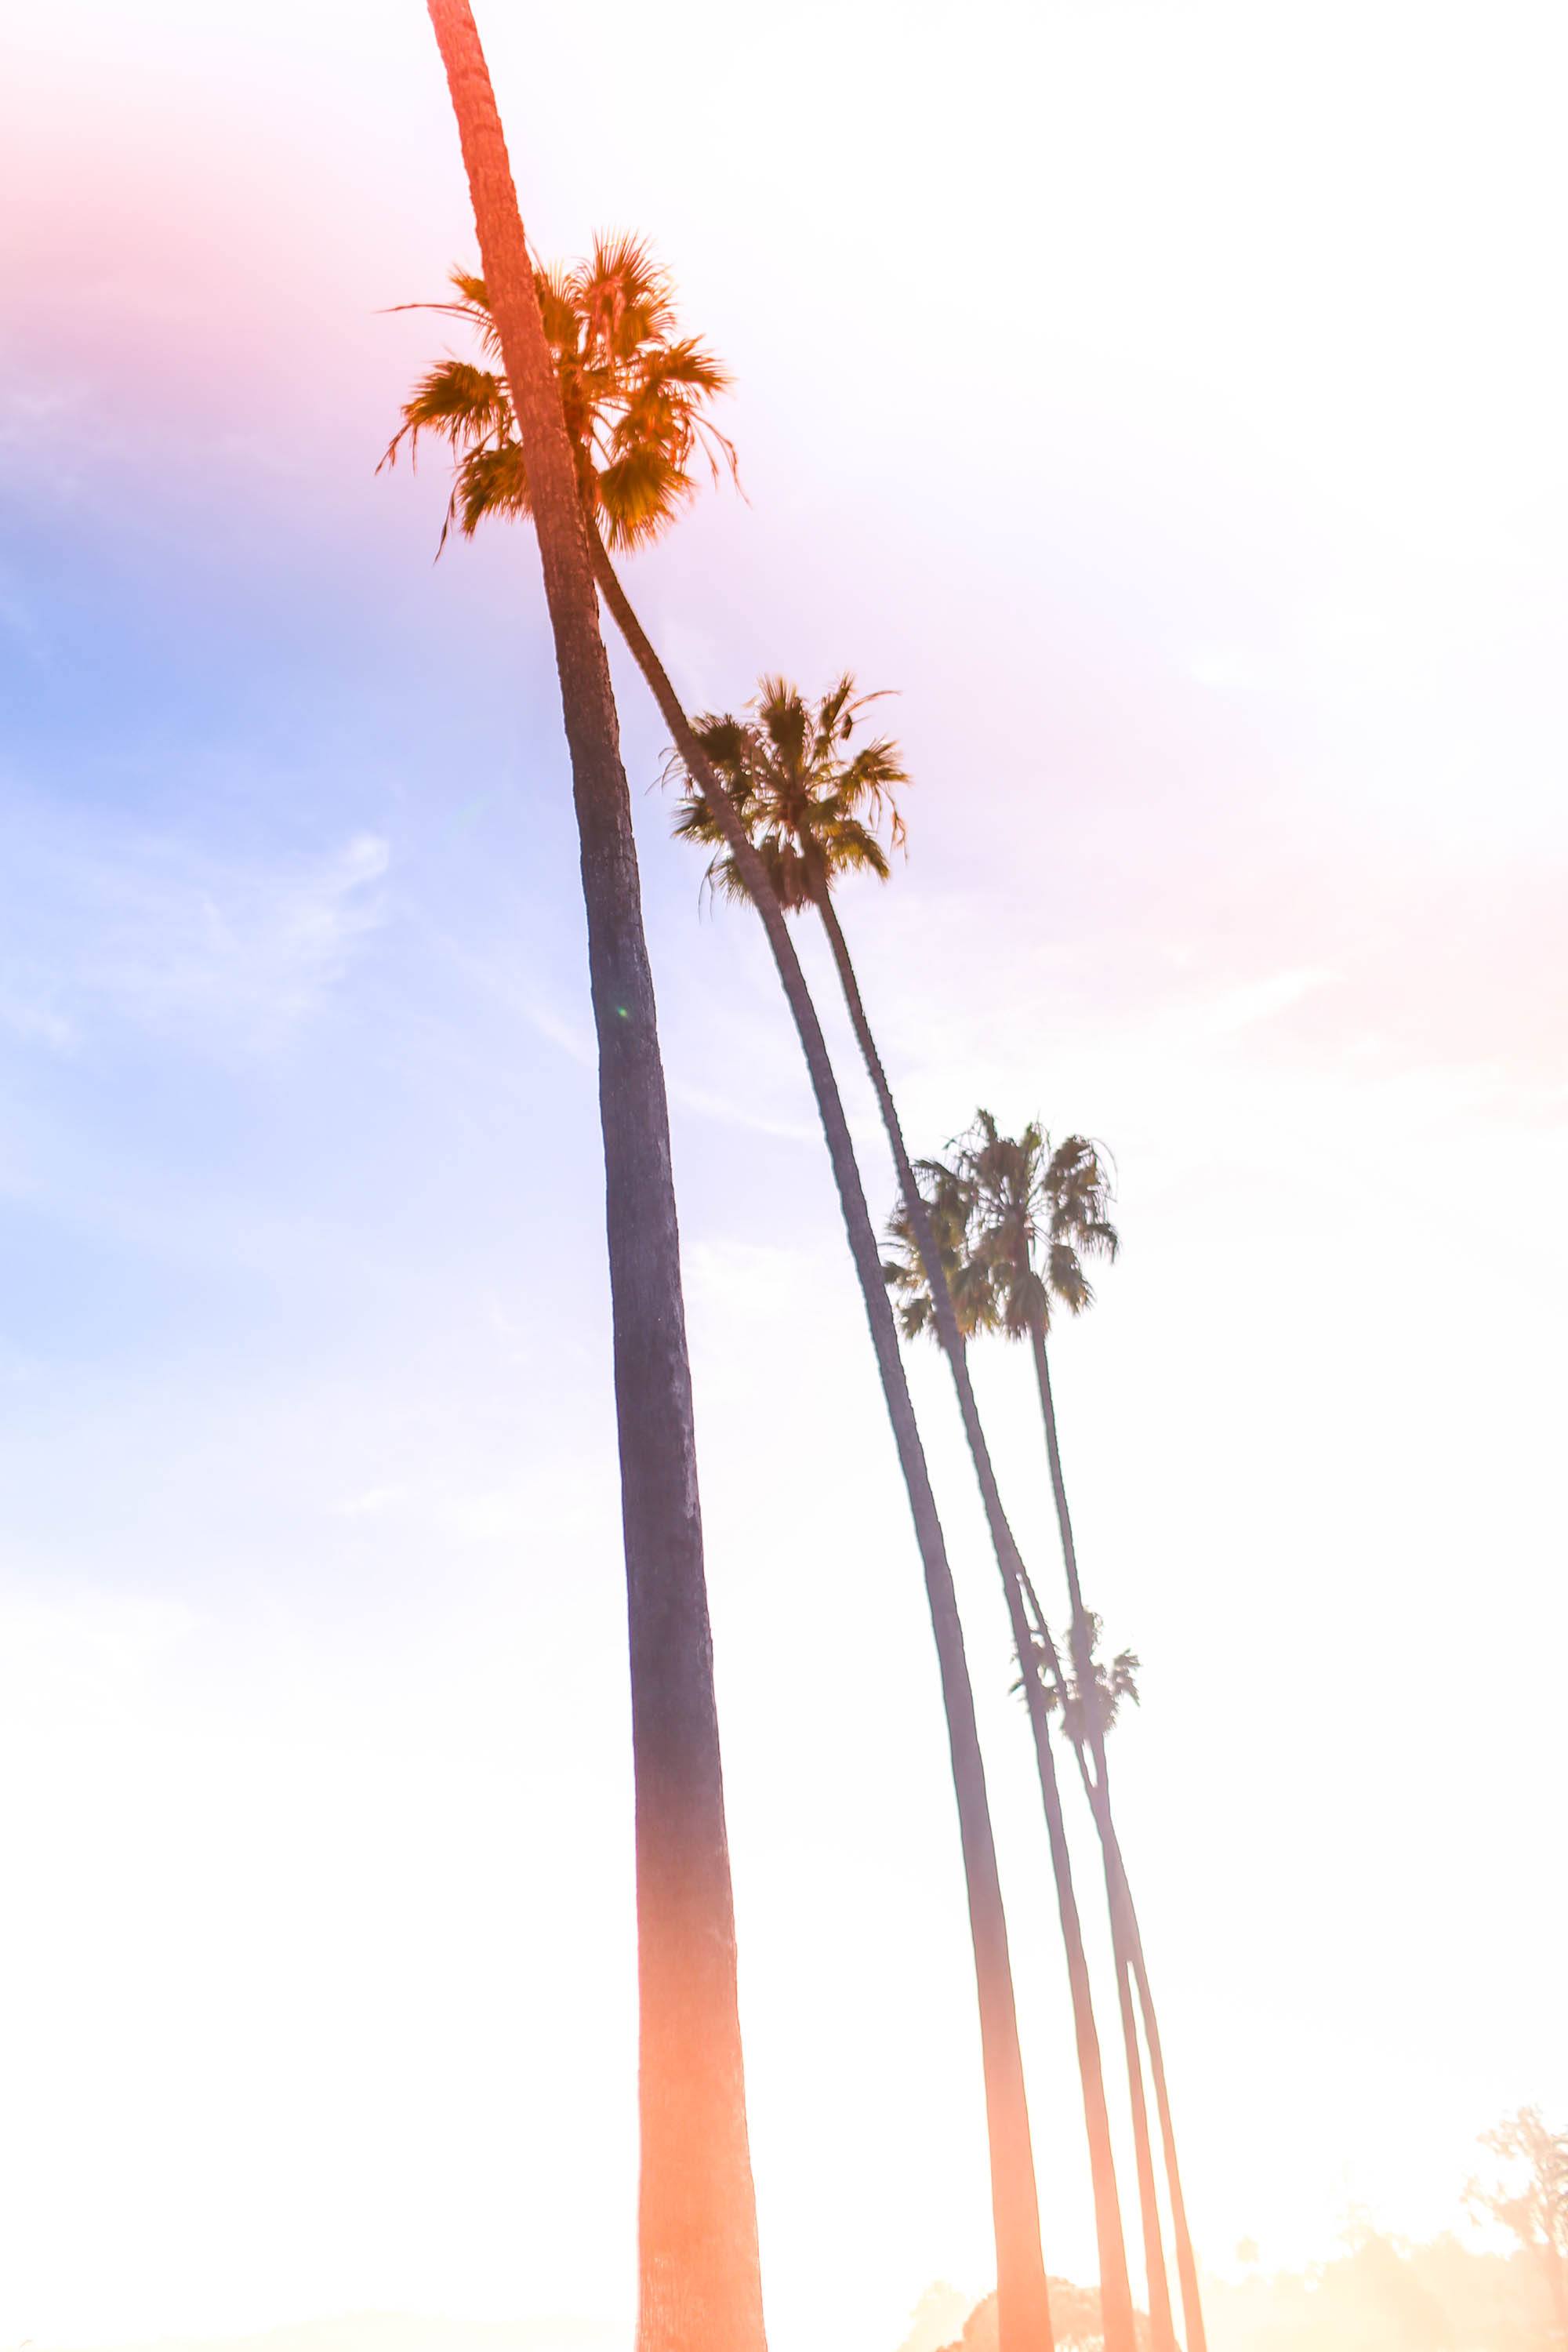 Palm trees reaching for the sky in Santa Barbara